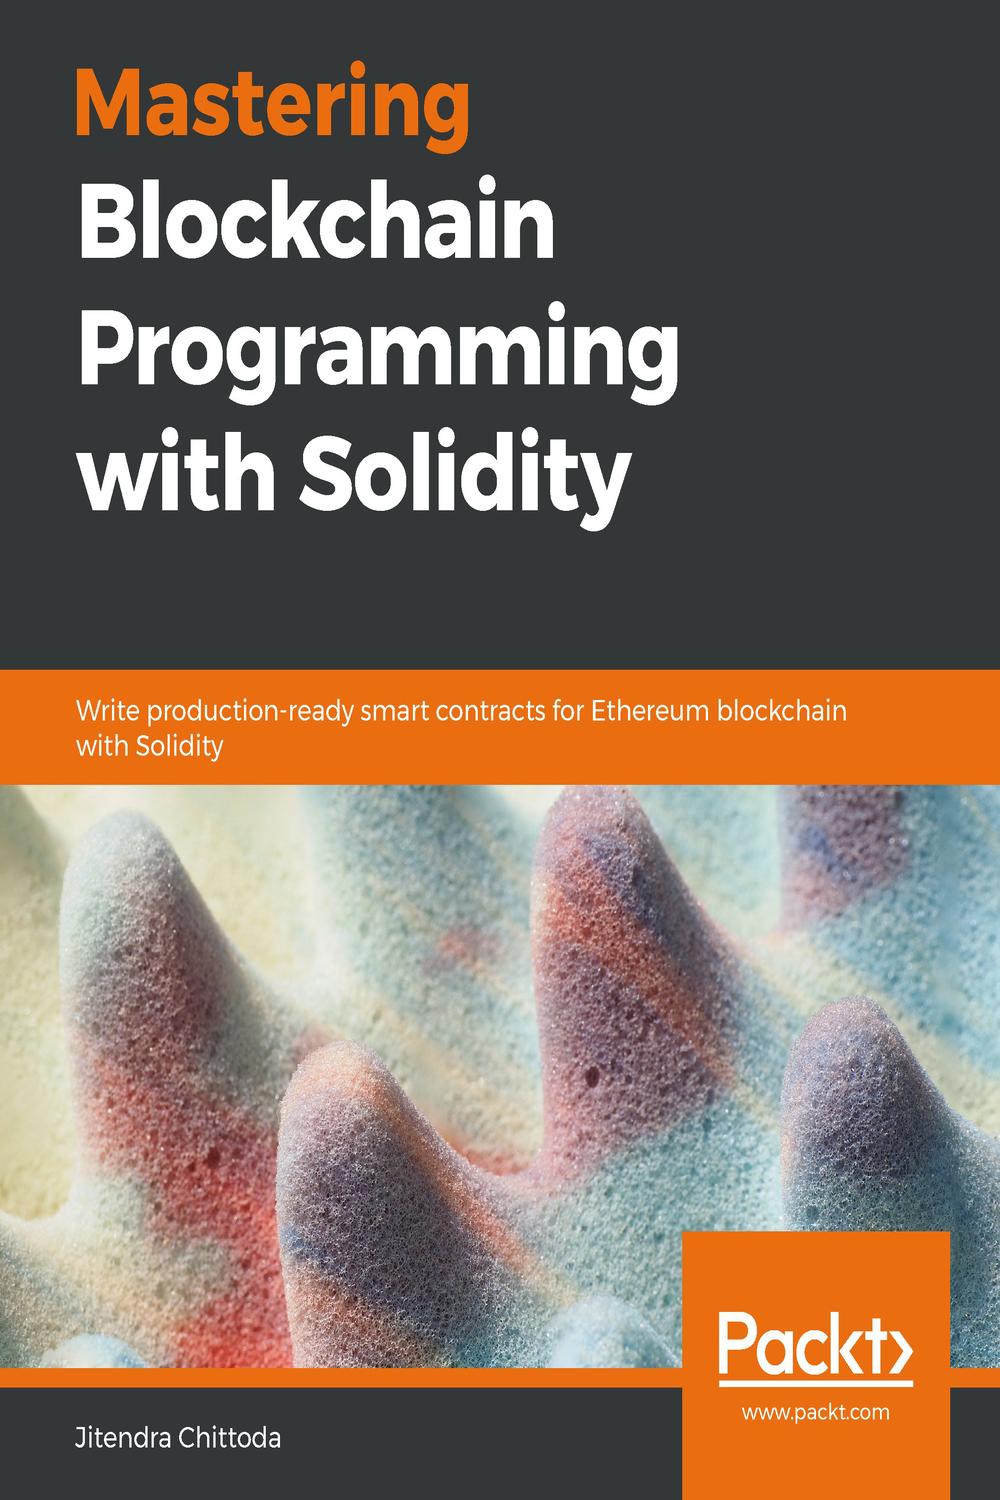 mastering blockchain programming with solidity pdf free download